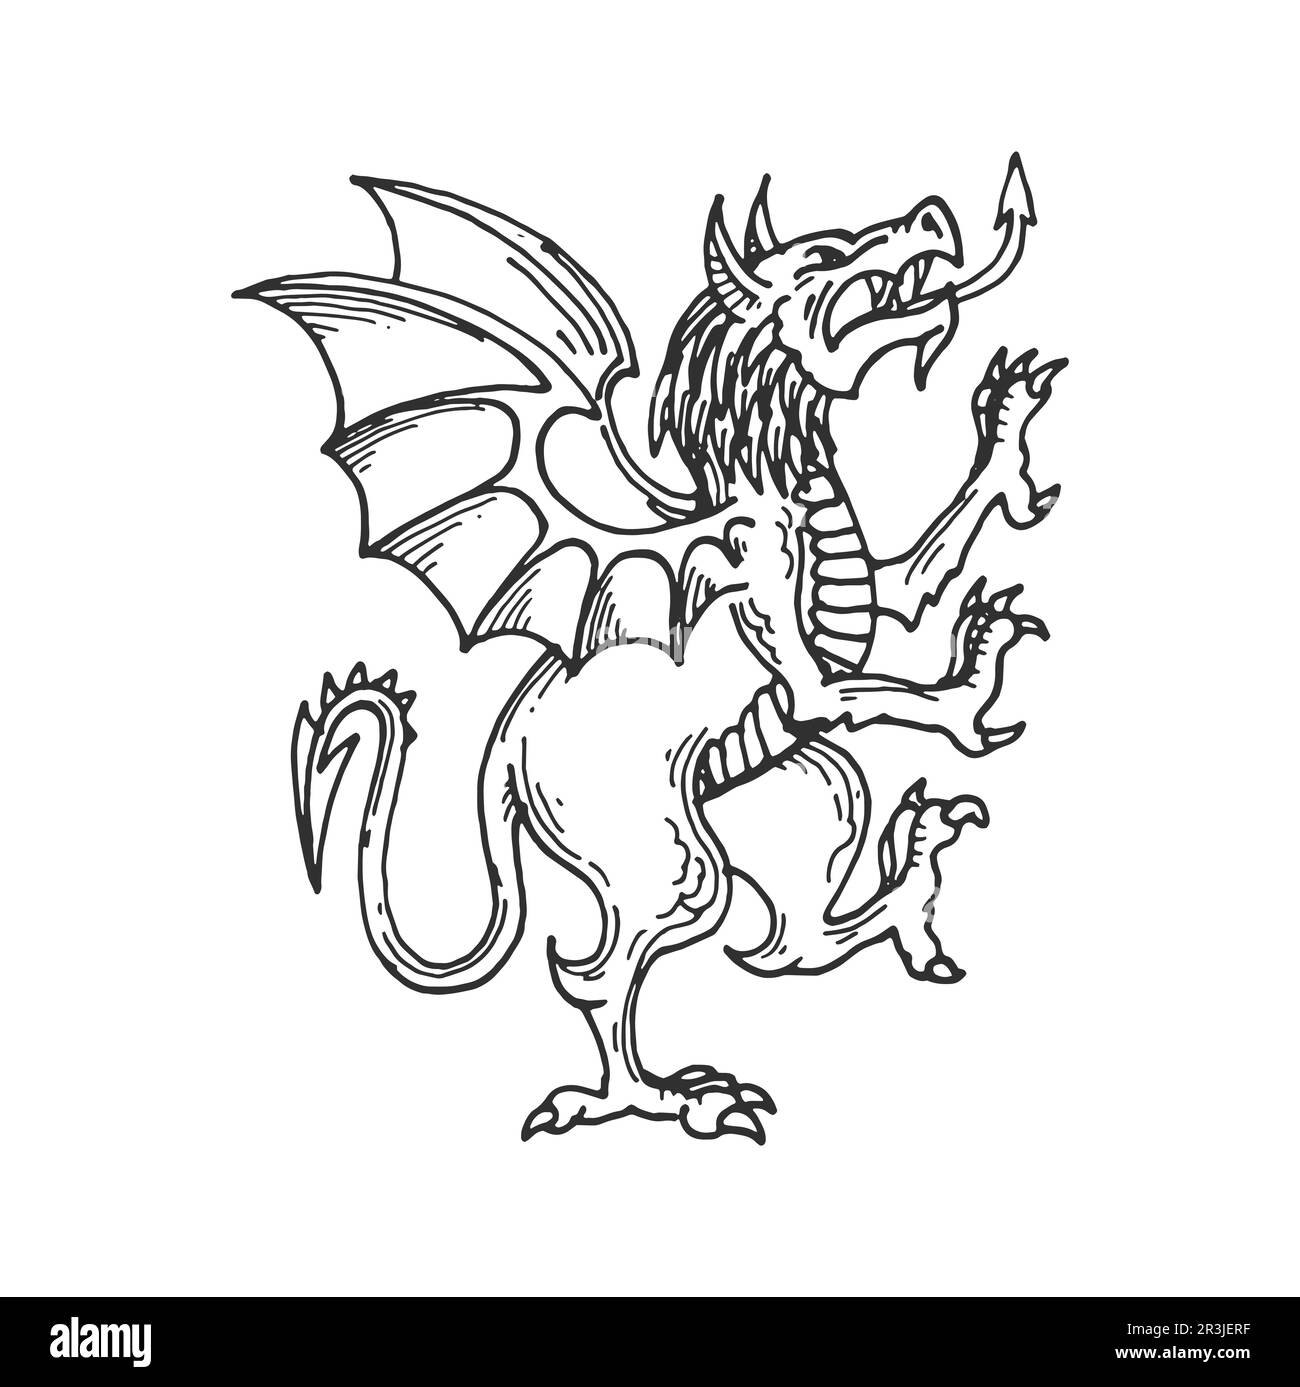 Heraldic Medieval dragon sketch, fantasy animal or mythic monster, vector heraldry symbol. Heraldic rampant dragon with wings and claws, Medieval fantasy creature beast for coat of arms or heraldry Stock Vector